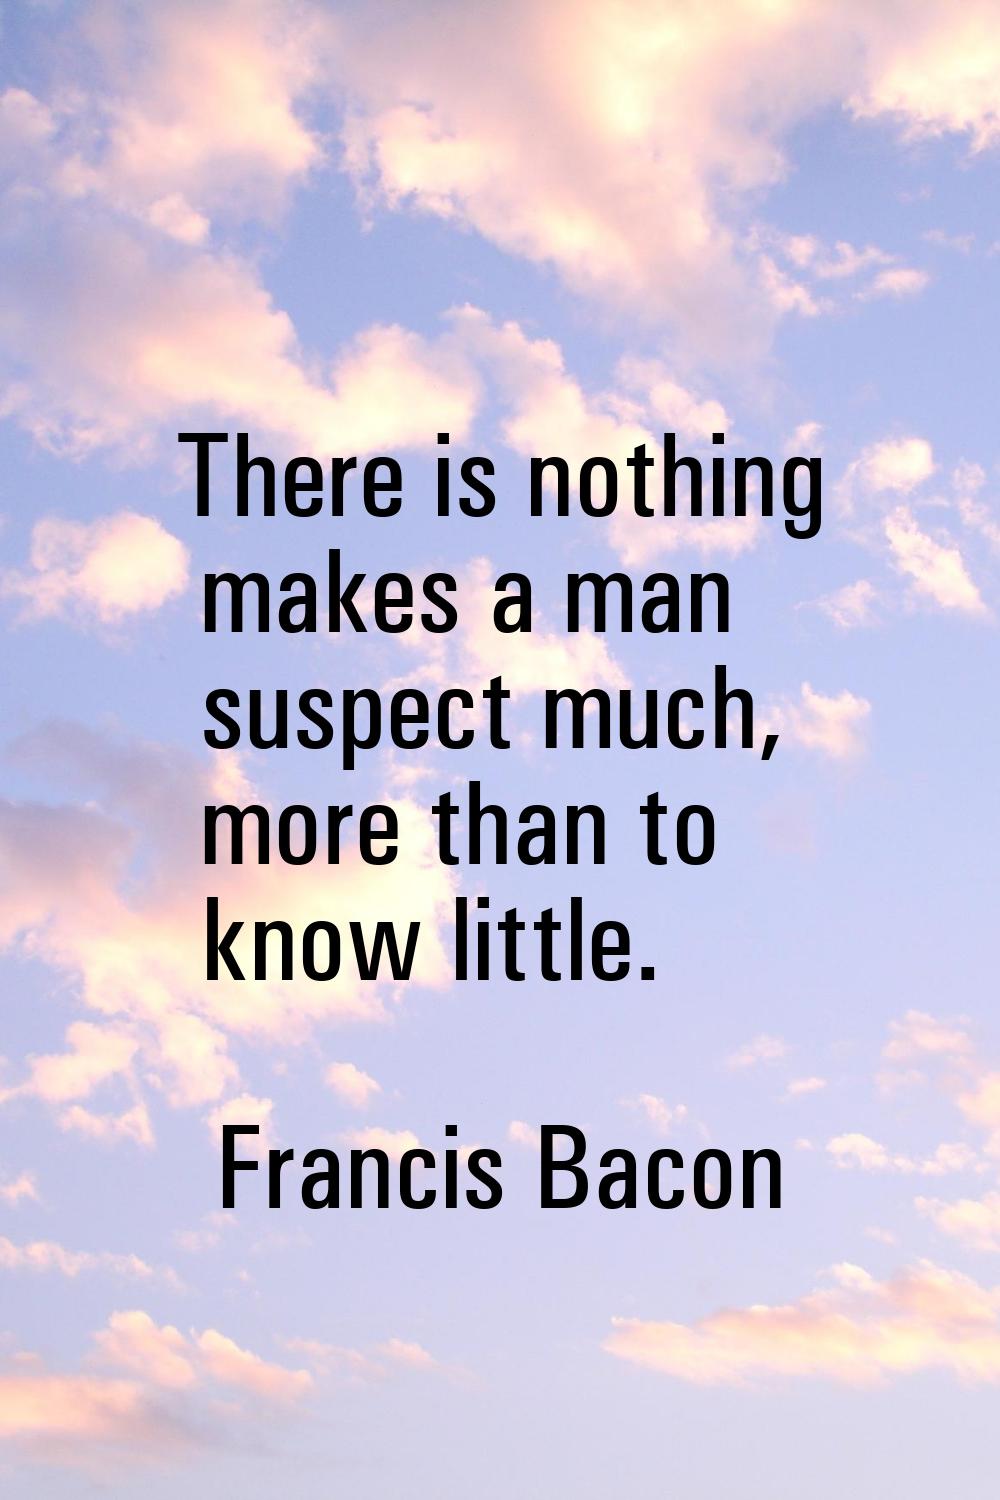 There is nothing makes a man suspect much, more than to know little.